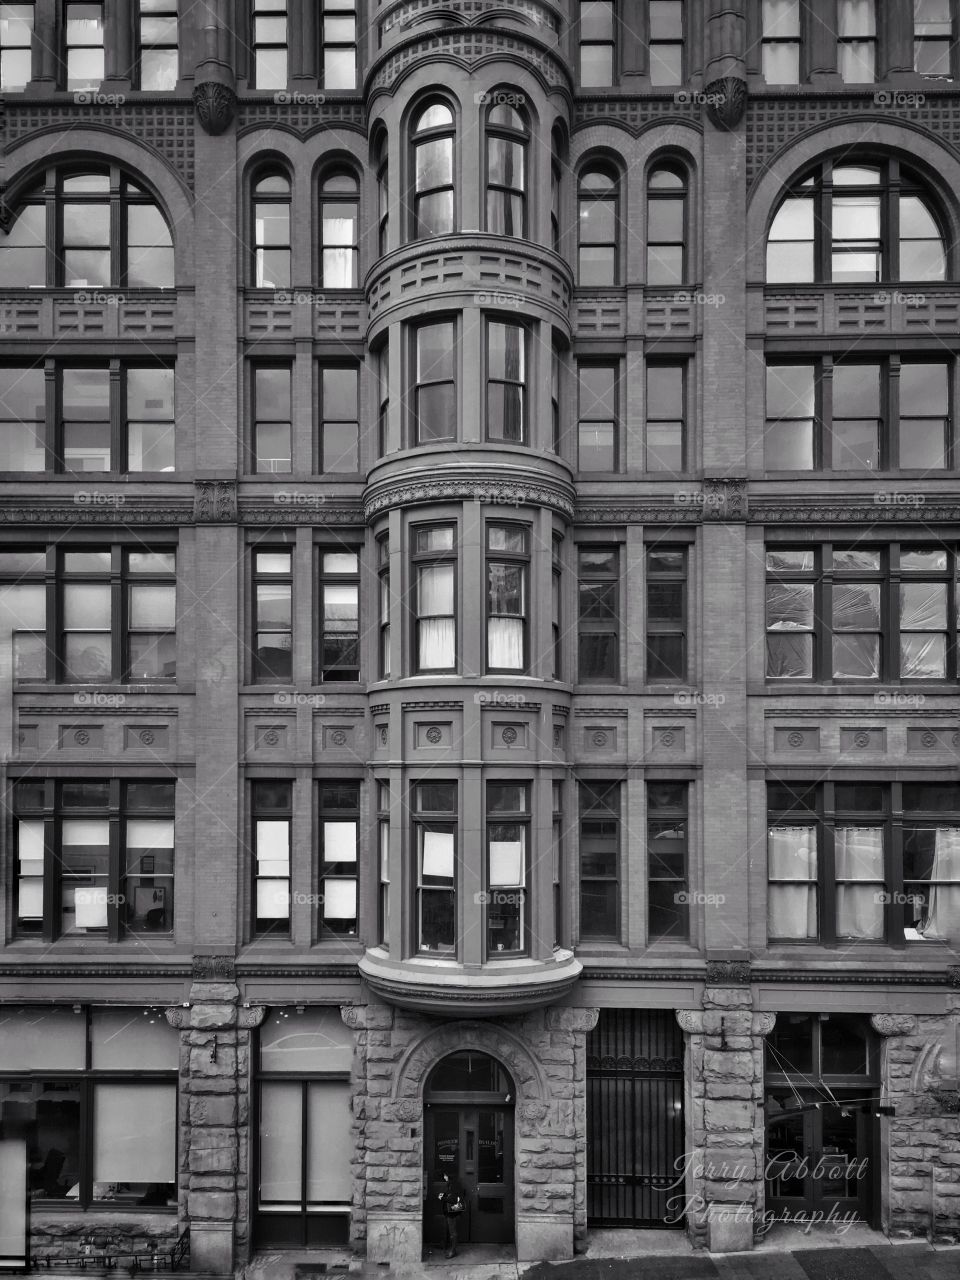 The Pioneer Building from the late 1800’s in Seattle’s Pioneer Square